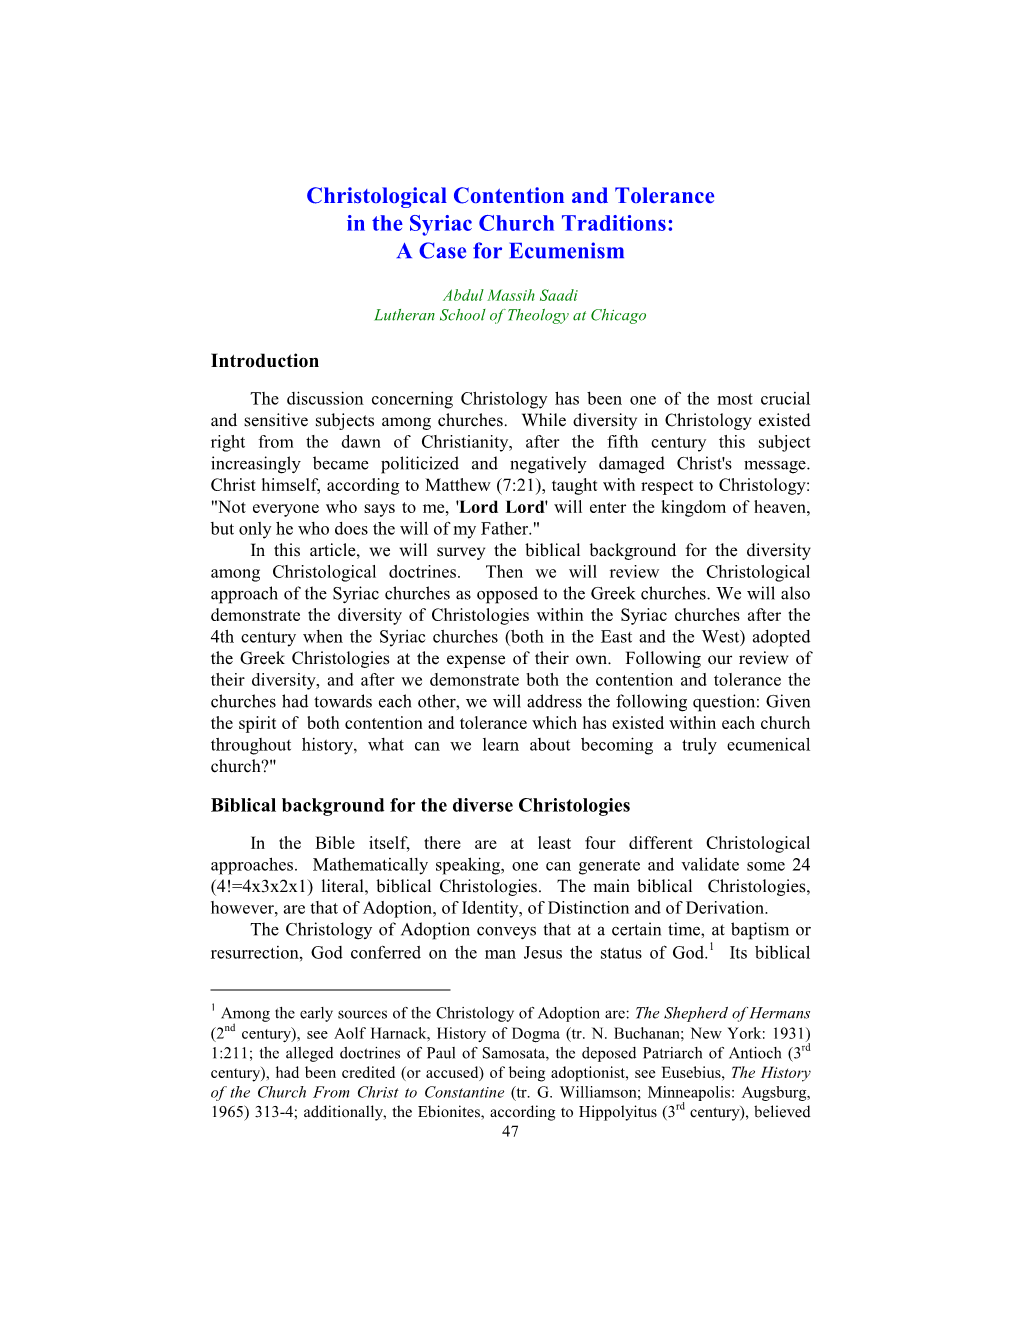 Christological Contention and Tolerance in the Syriac Church Traditions: a Case for Ecumenism